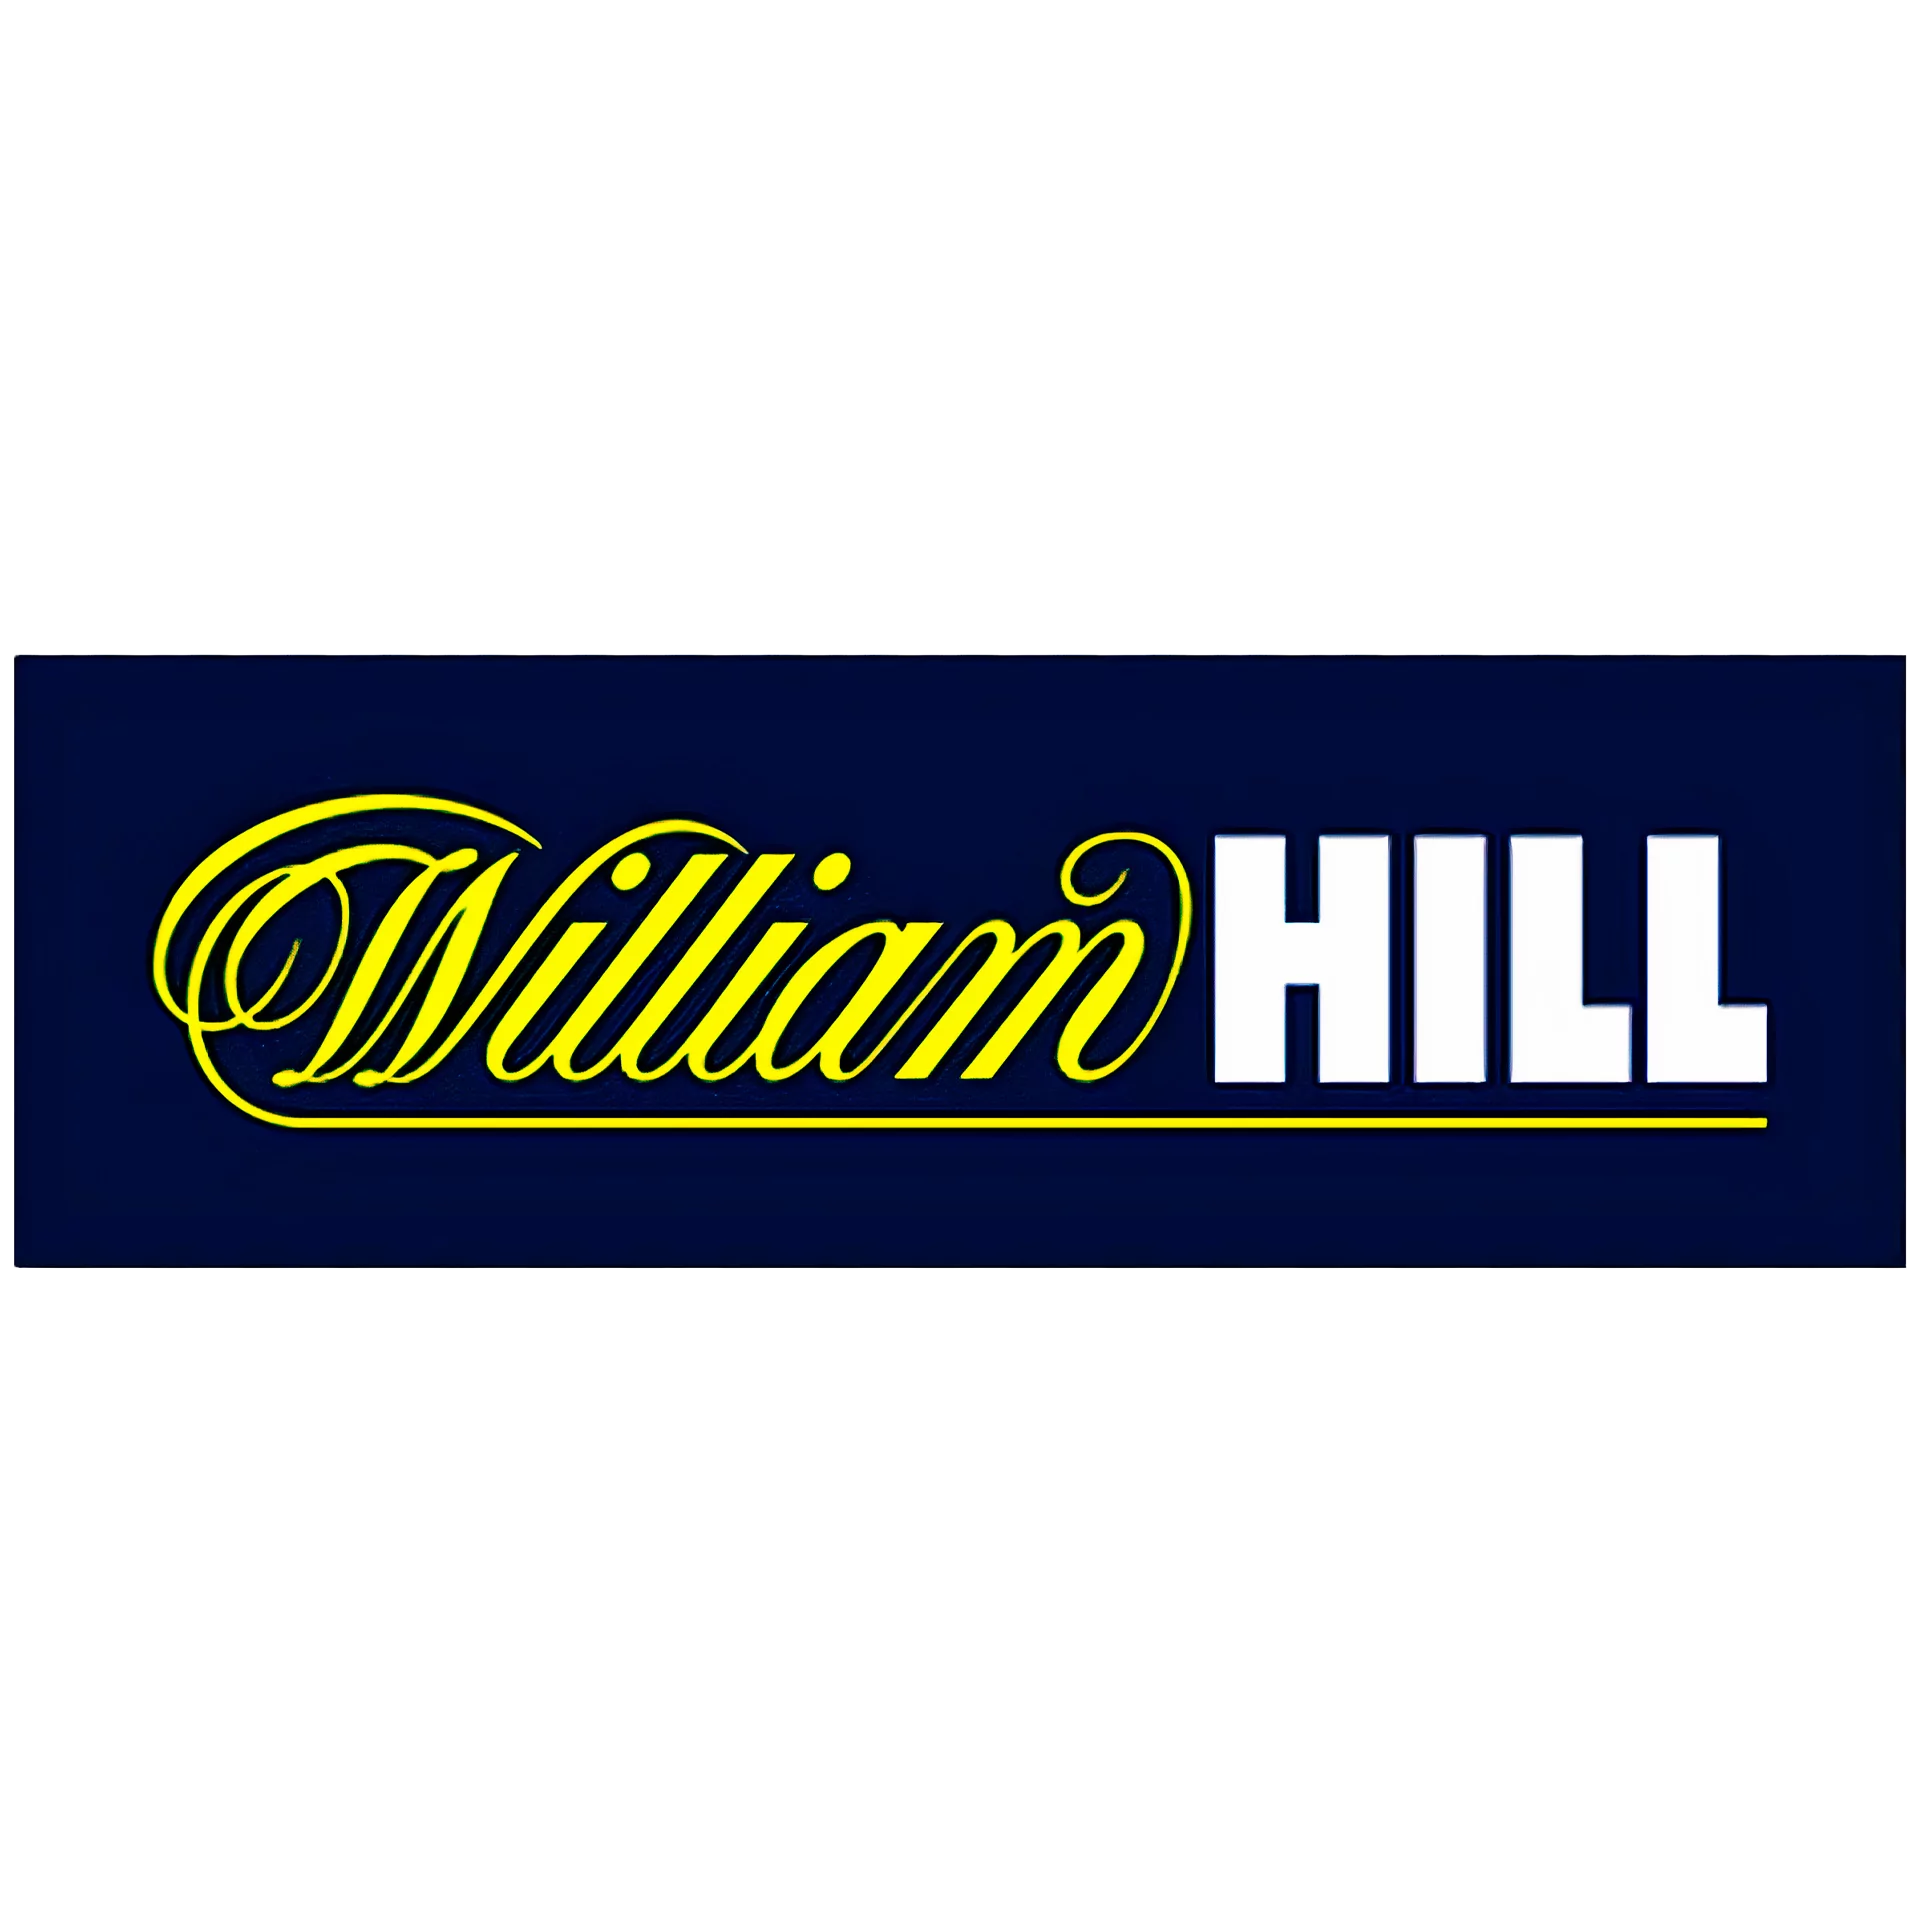 Choose William Hill to bet on cricket online.